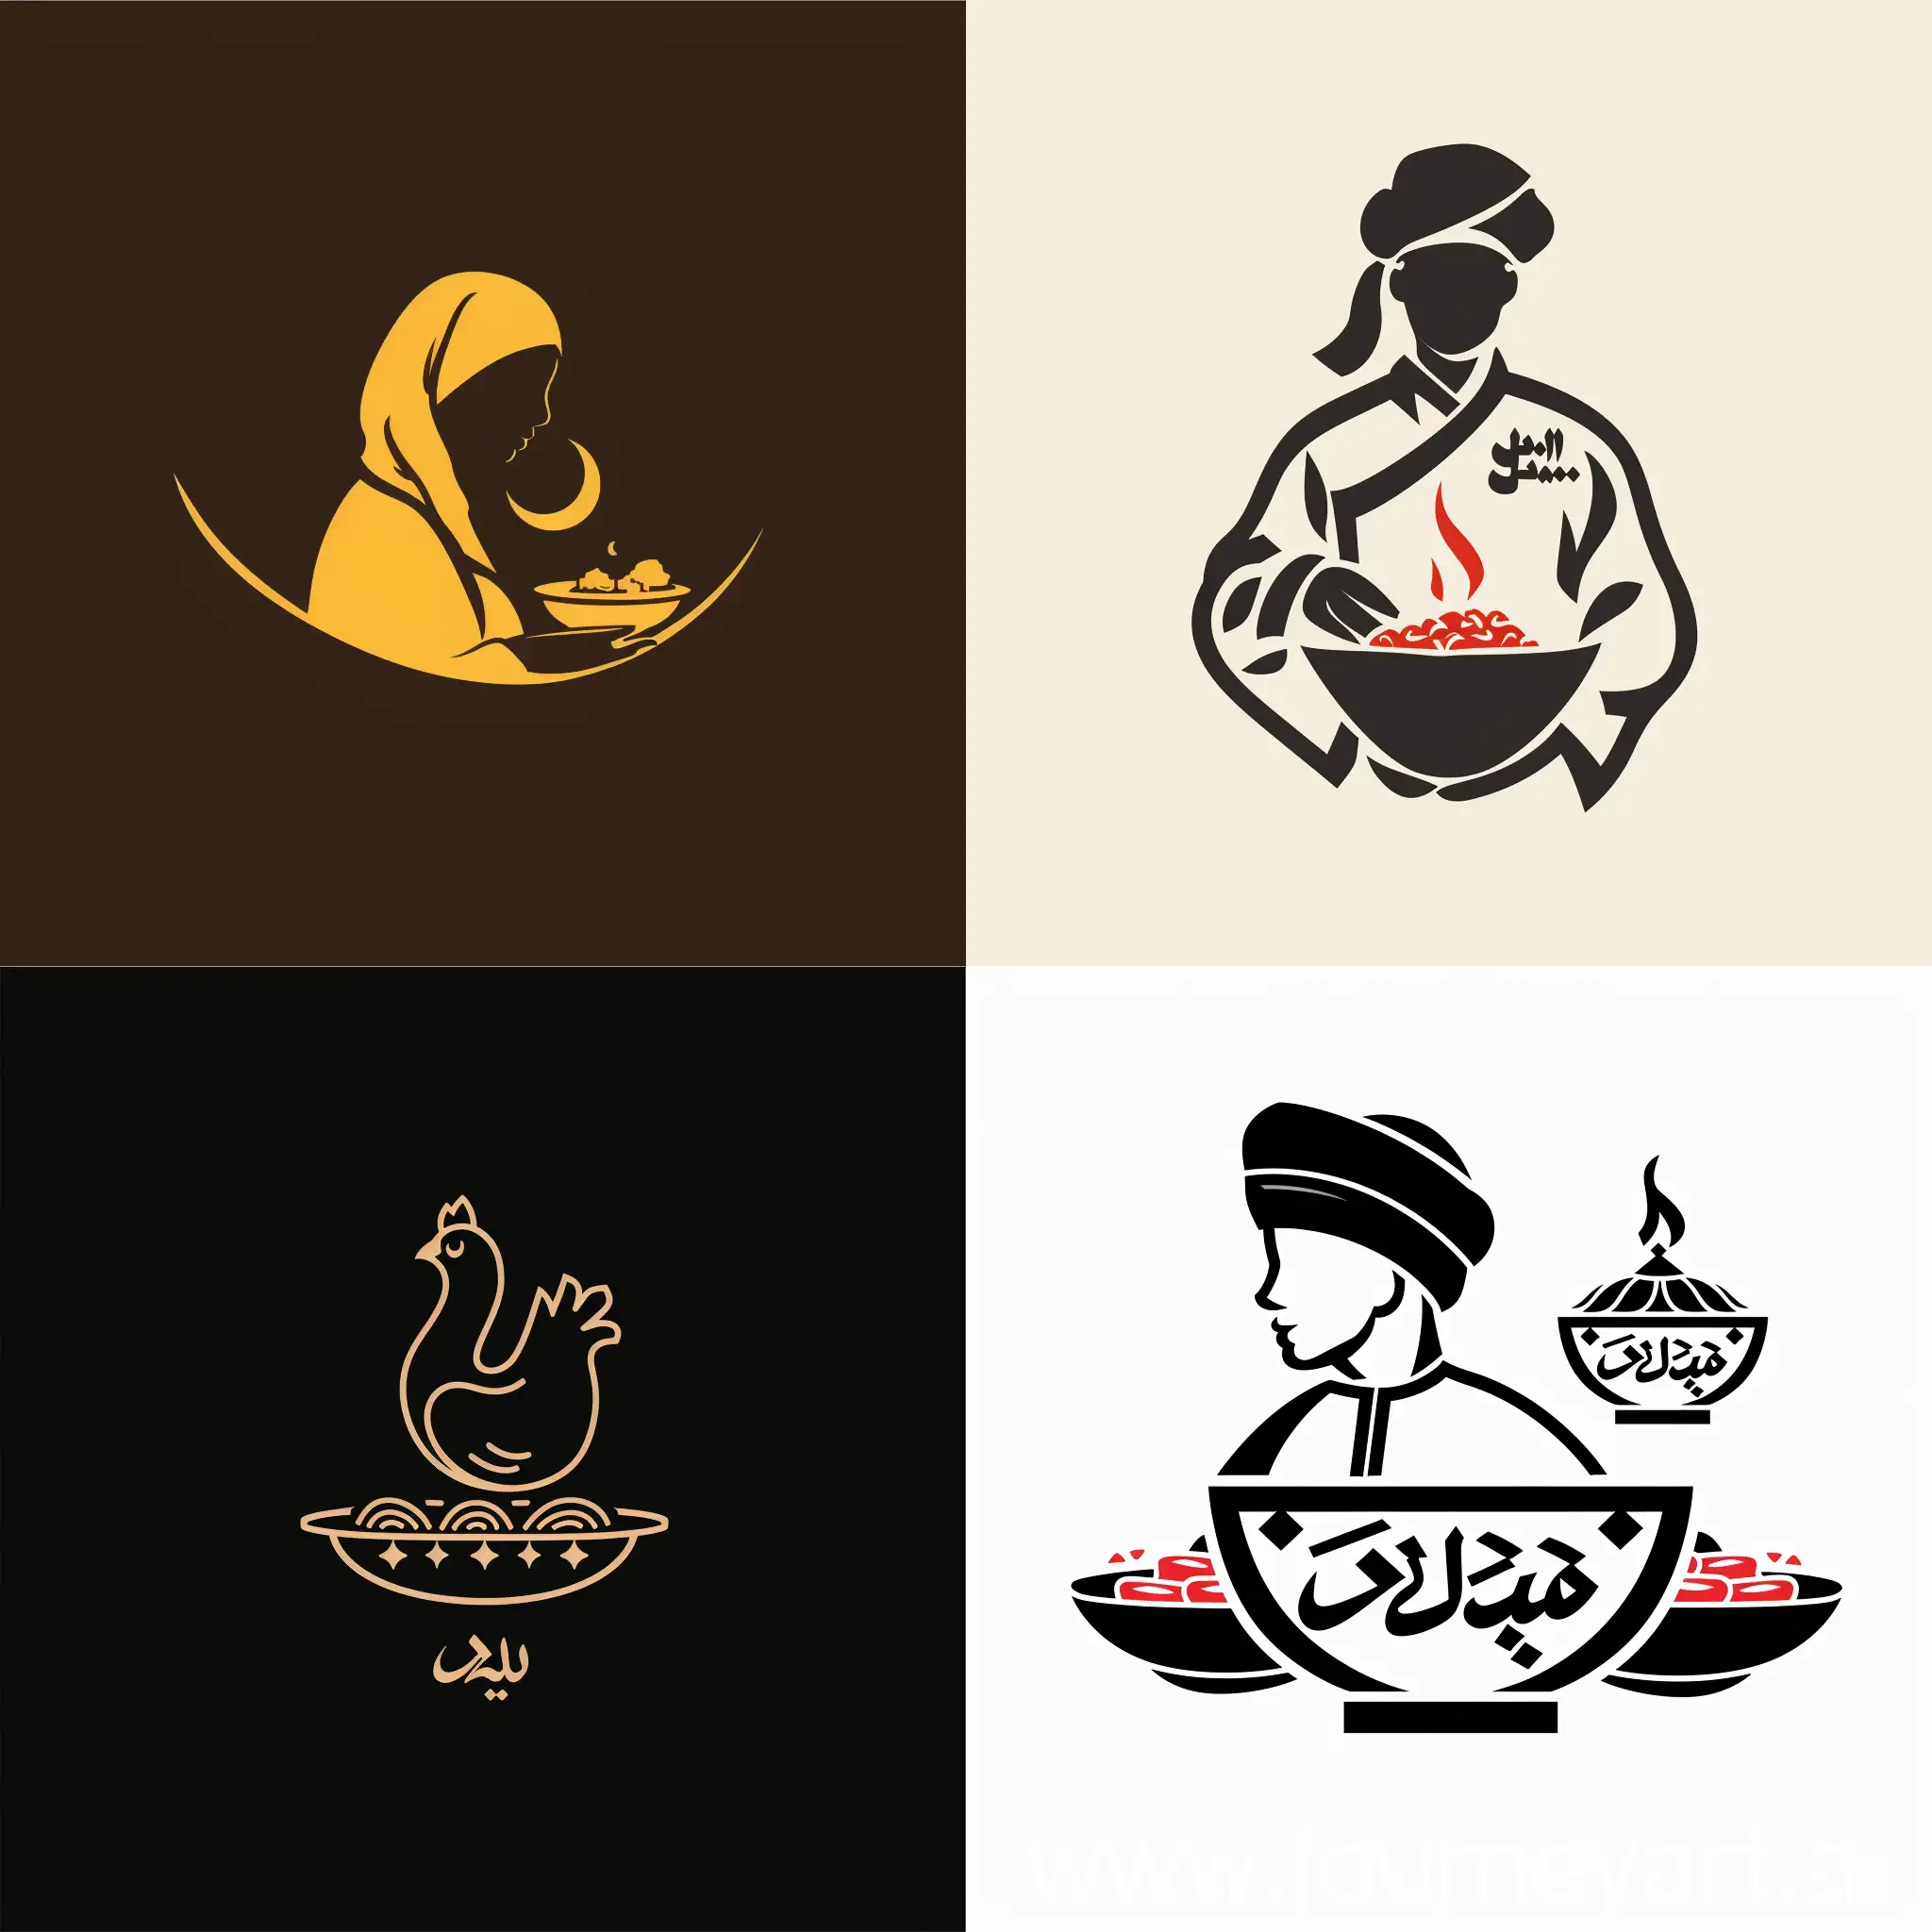 Authentic-Yemeni-Cuisine-Logo-Traditional-Meals-in-Vibrant-Setting